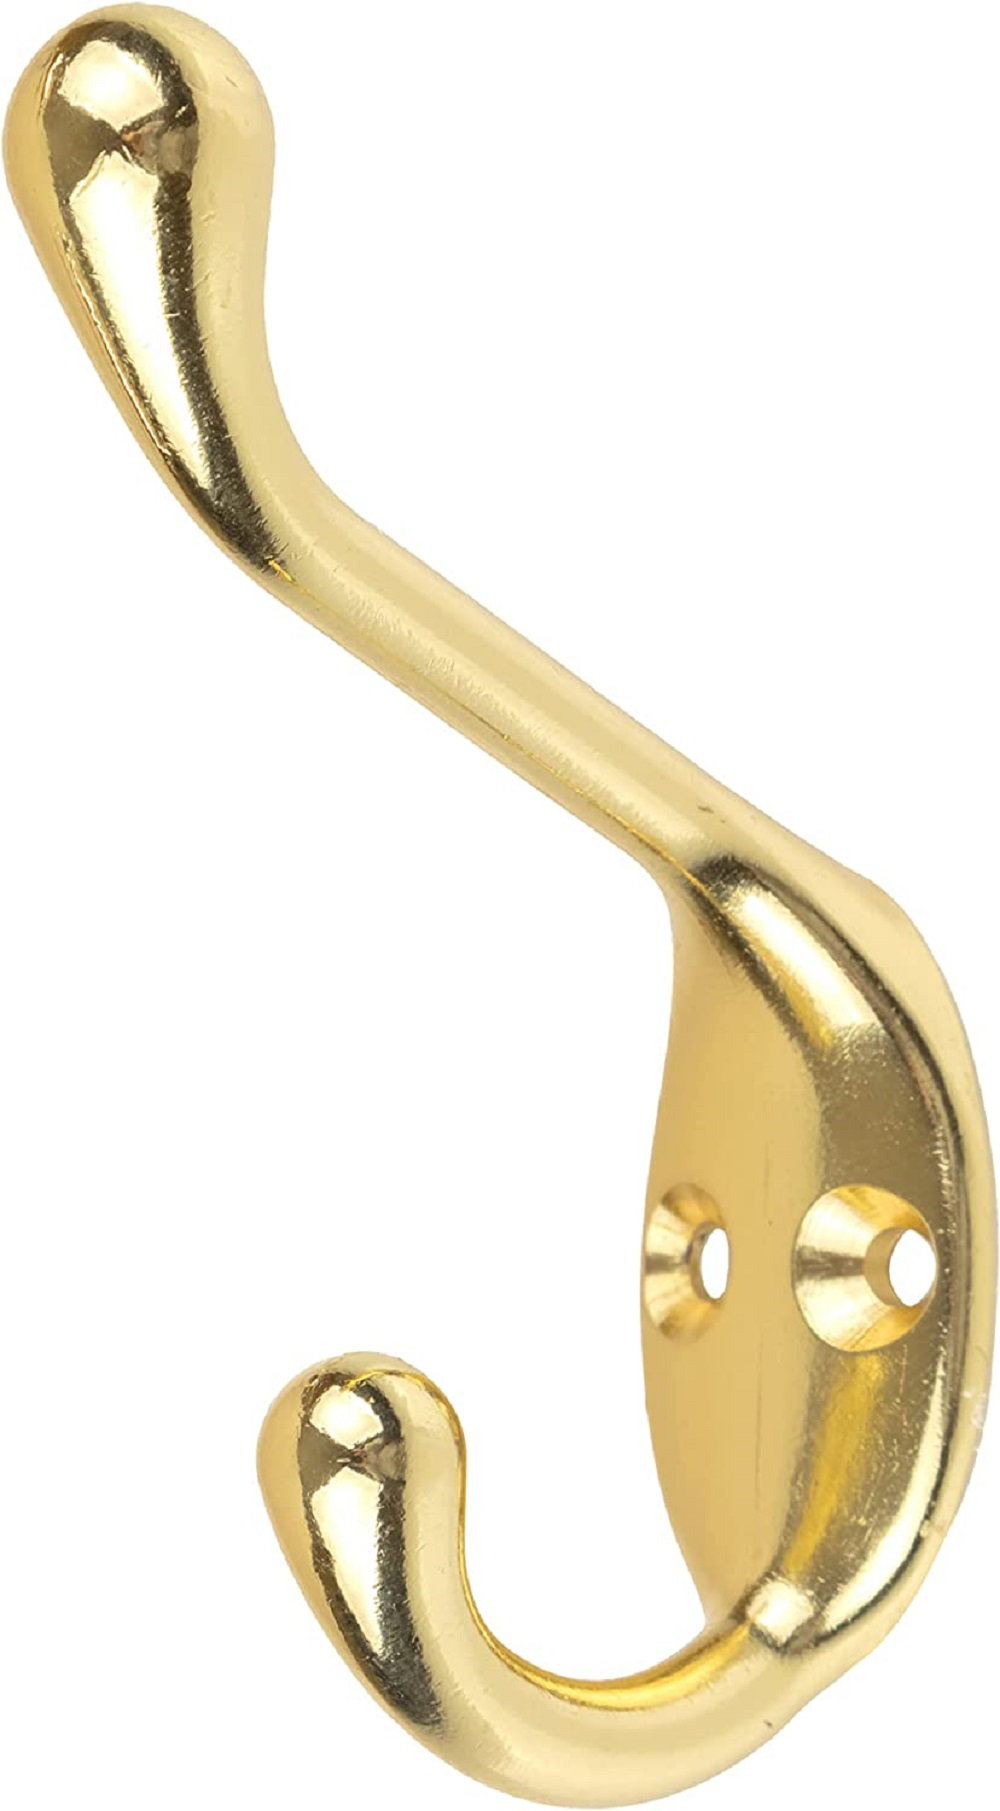 Heavy Duty Brass Plated Hat and Coat Hook